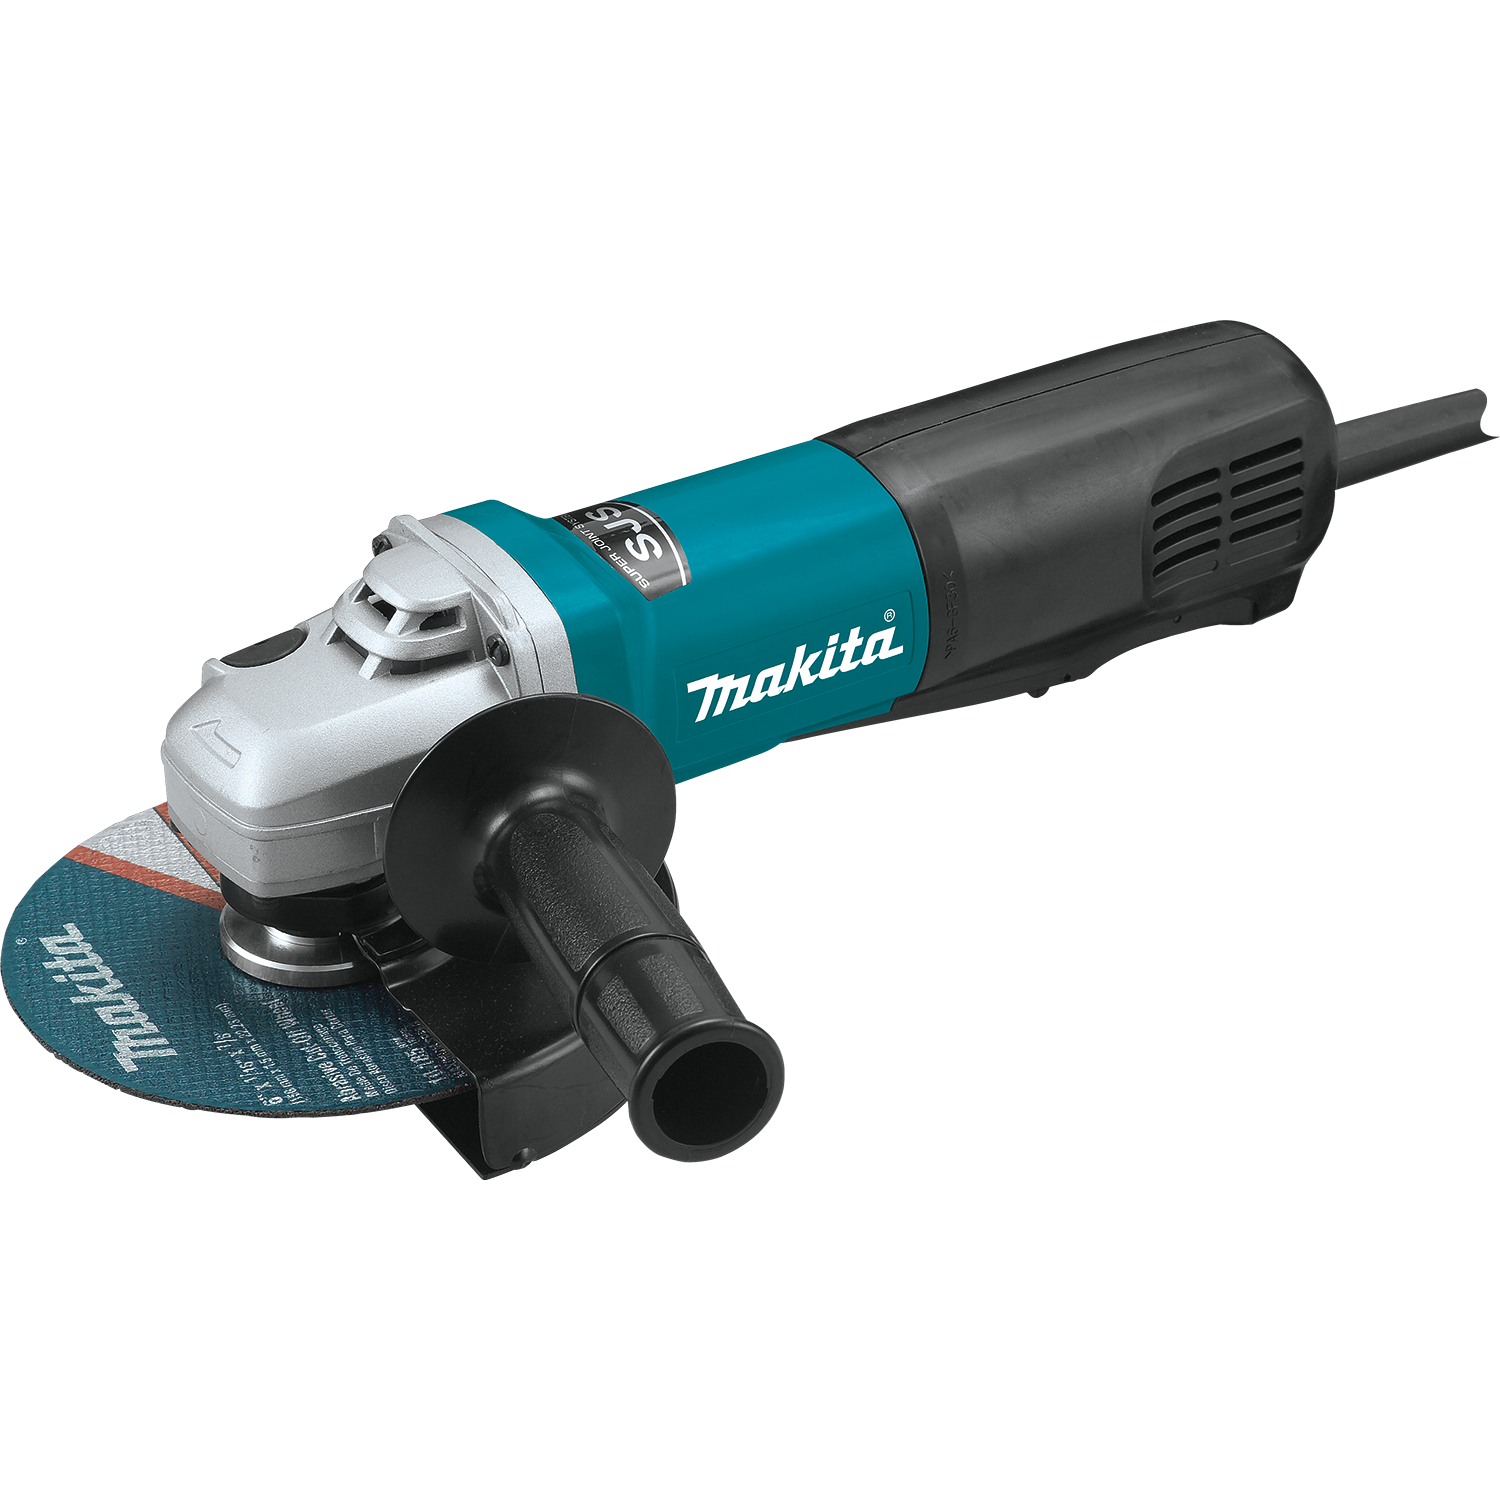 Makita 6 Inch SJS High-Power Paddle Switch Cut-Off/Angle Grinder from GME Supply